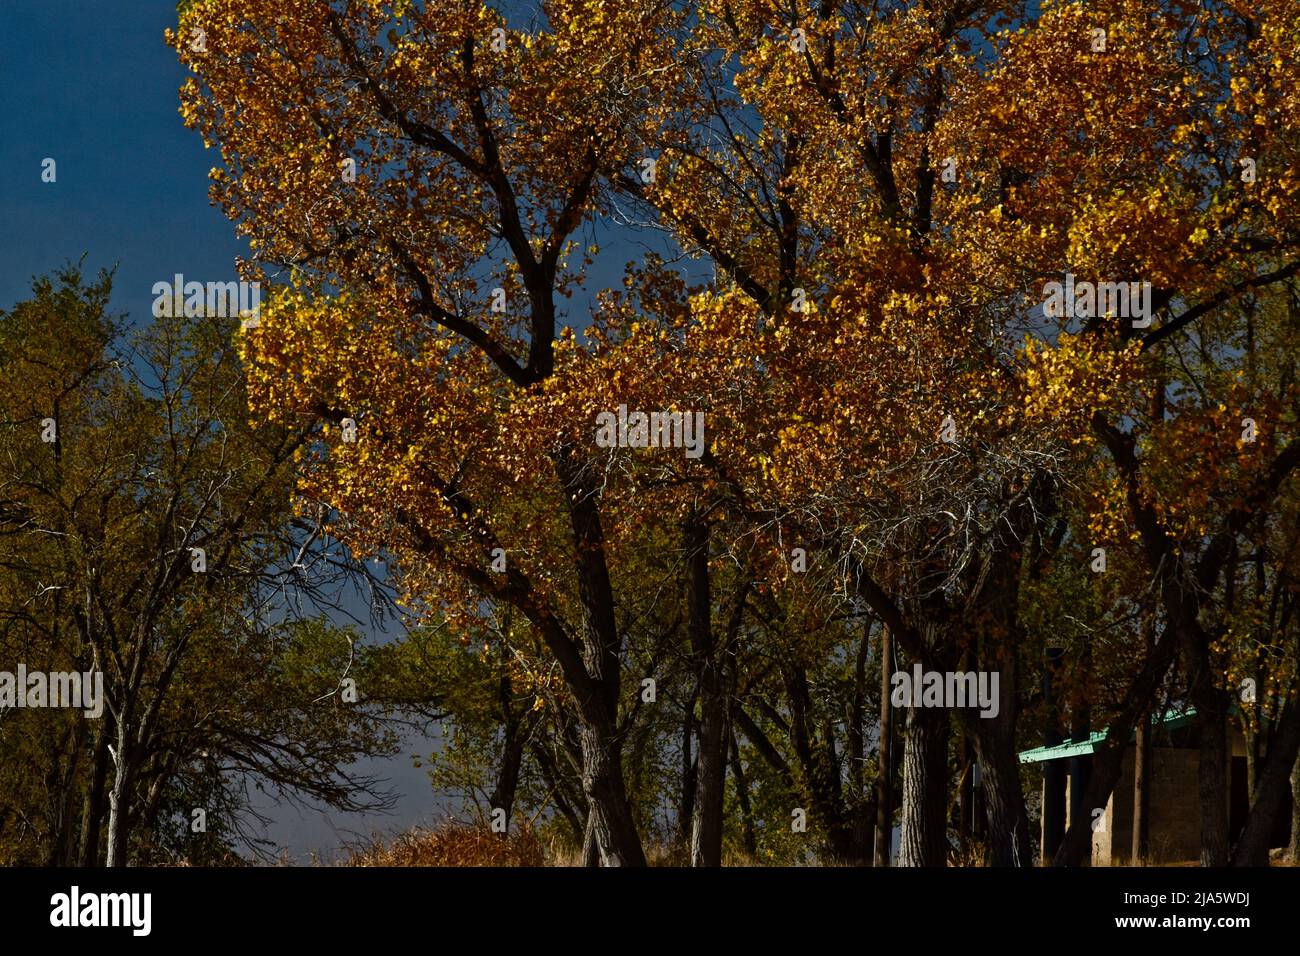 Trees in Fall Yellw Colors, Canyon, Texas in the Panhandle near Amarillo, Autumn f 2021. Stock Photo